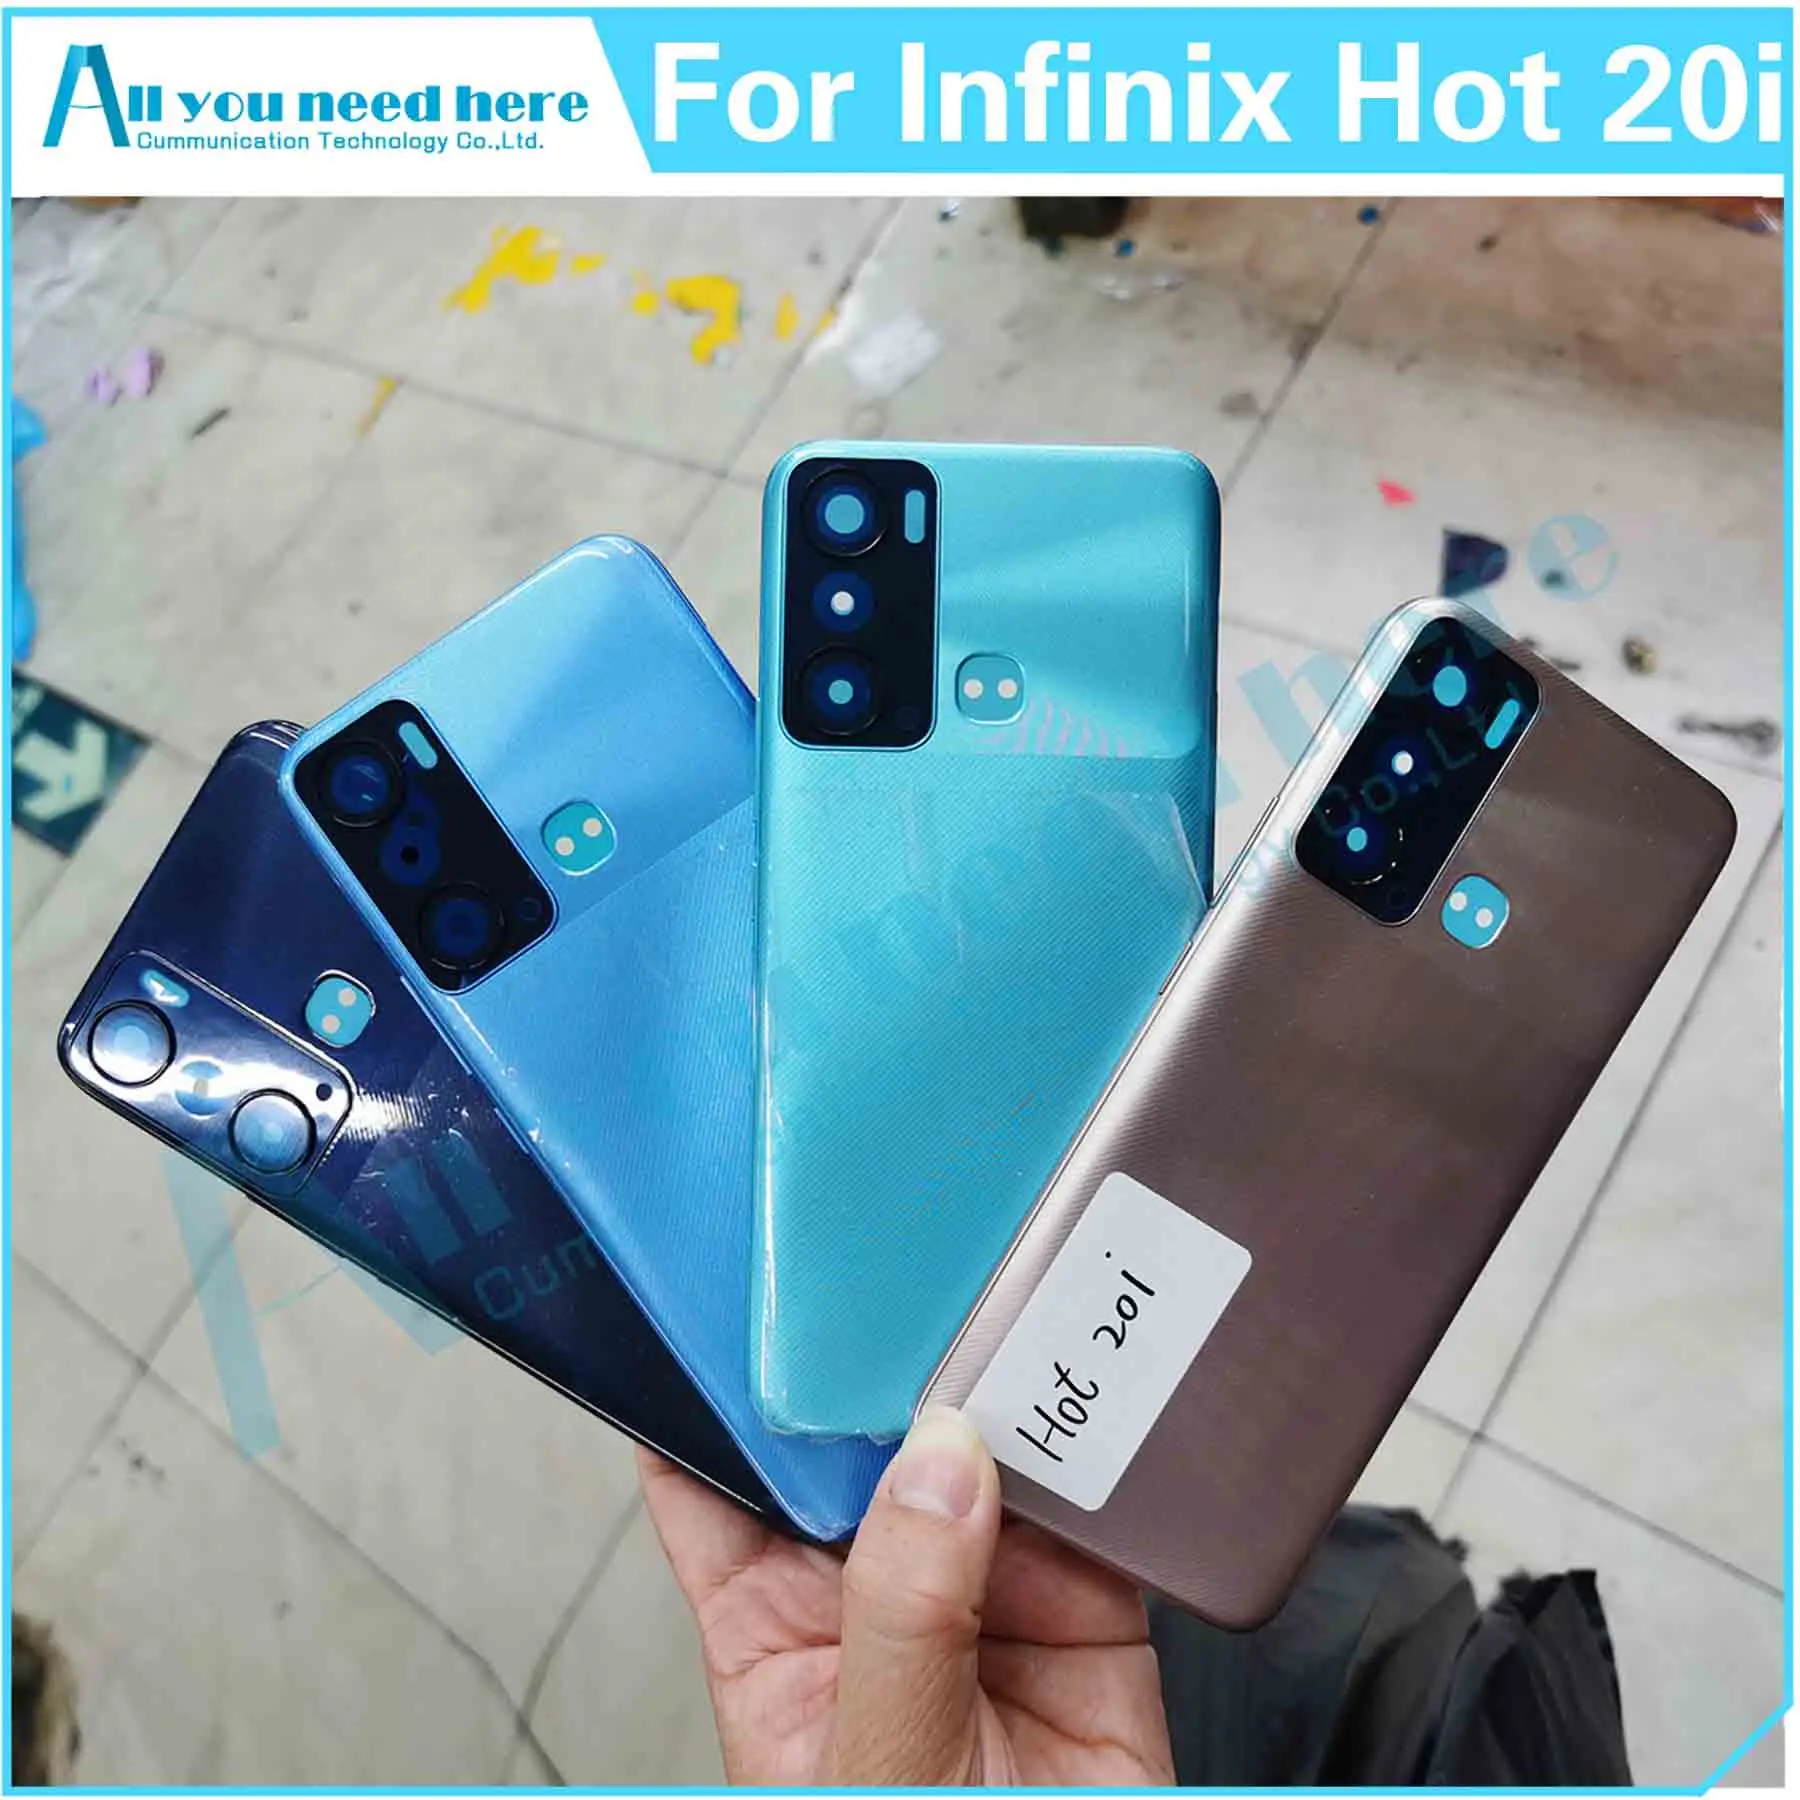 

Battery Back Cover Door Housing Rear Case Lid For Infinix Hot 20i X665C X665E Repair Parts Replacement